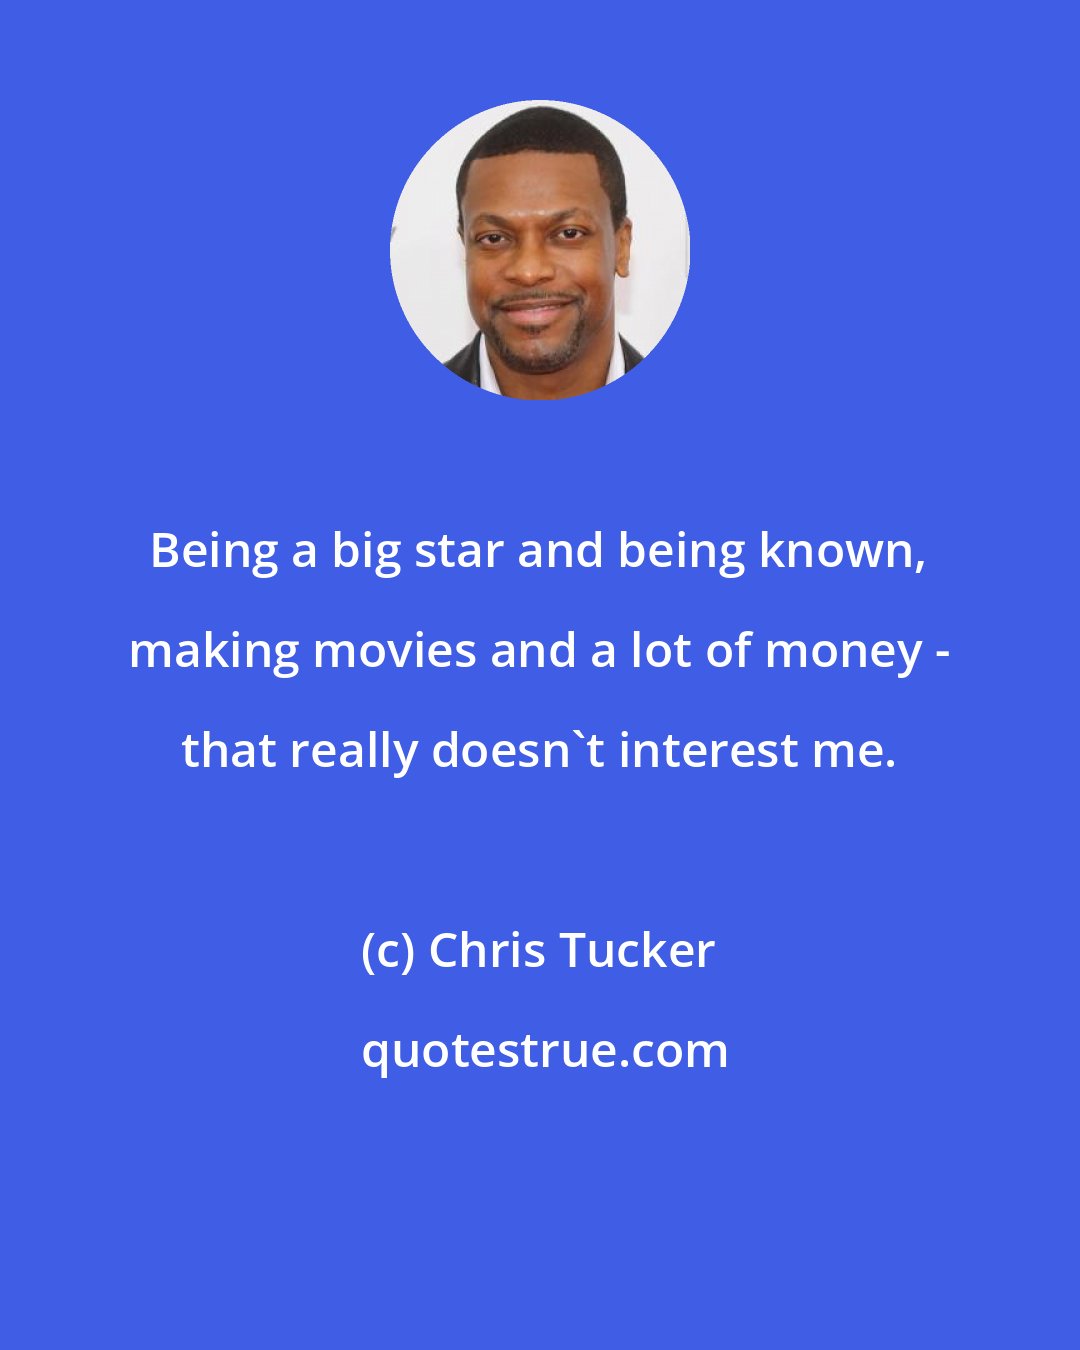 Chris Tucker: Being a big star and being known, making movies and a lot of money - that really doesn't interest me.